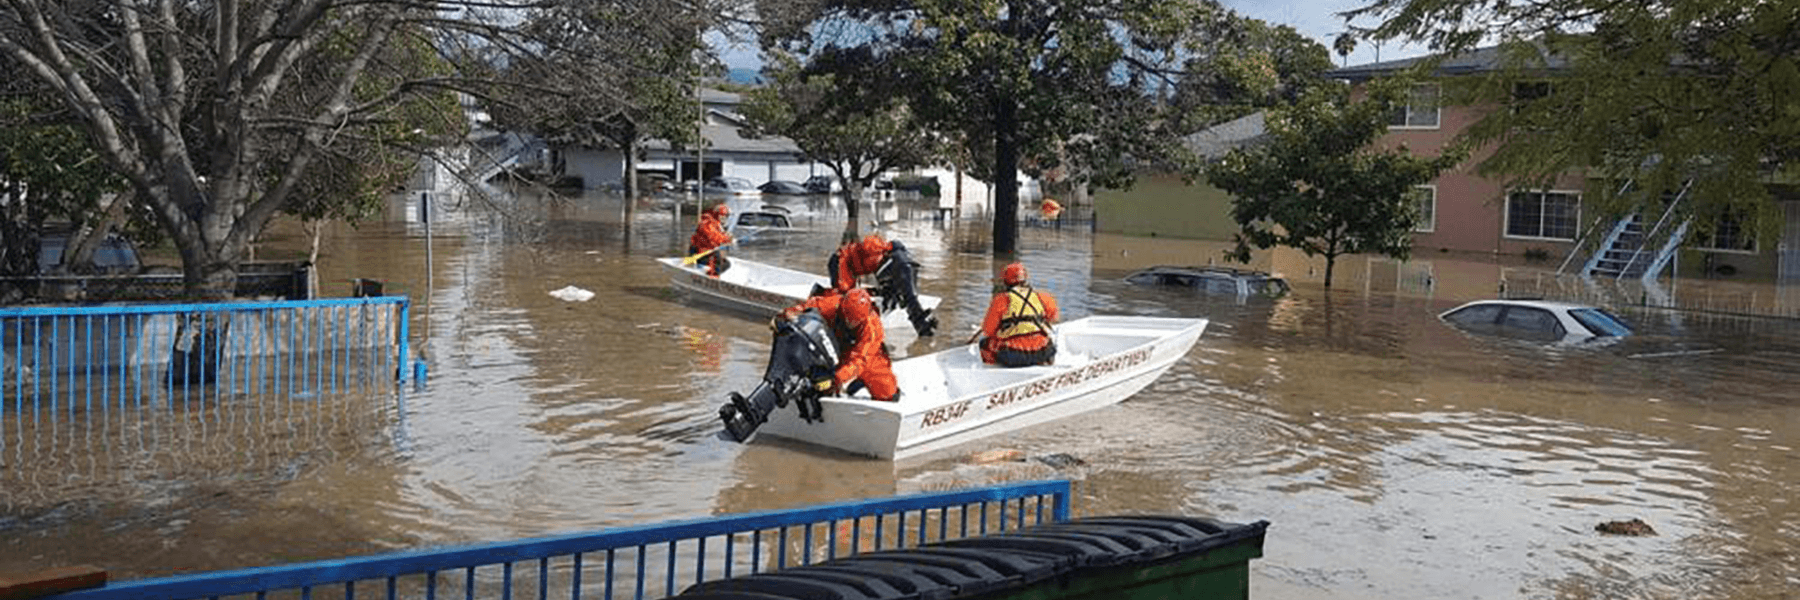 Two rescue boats in a flooded neighborhood.